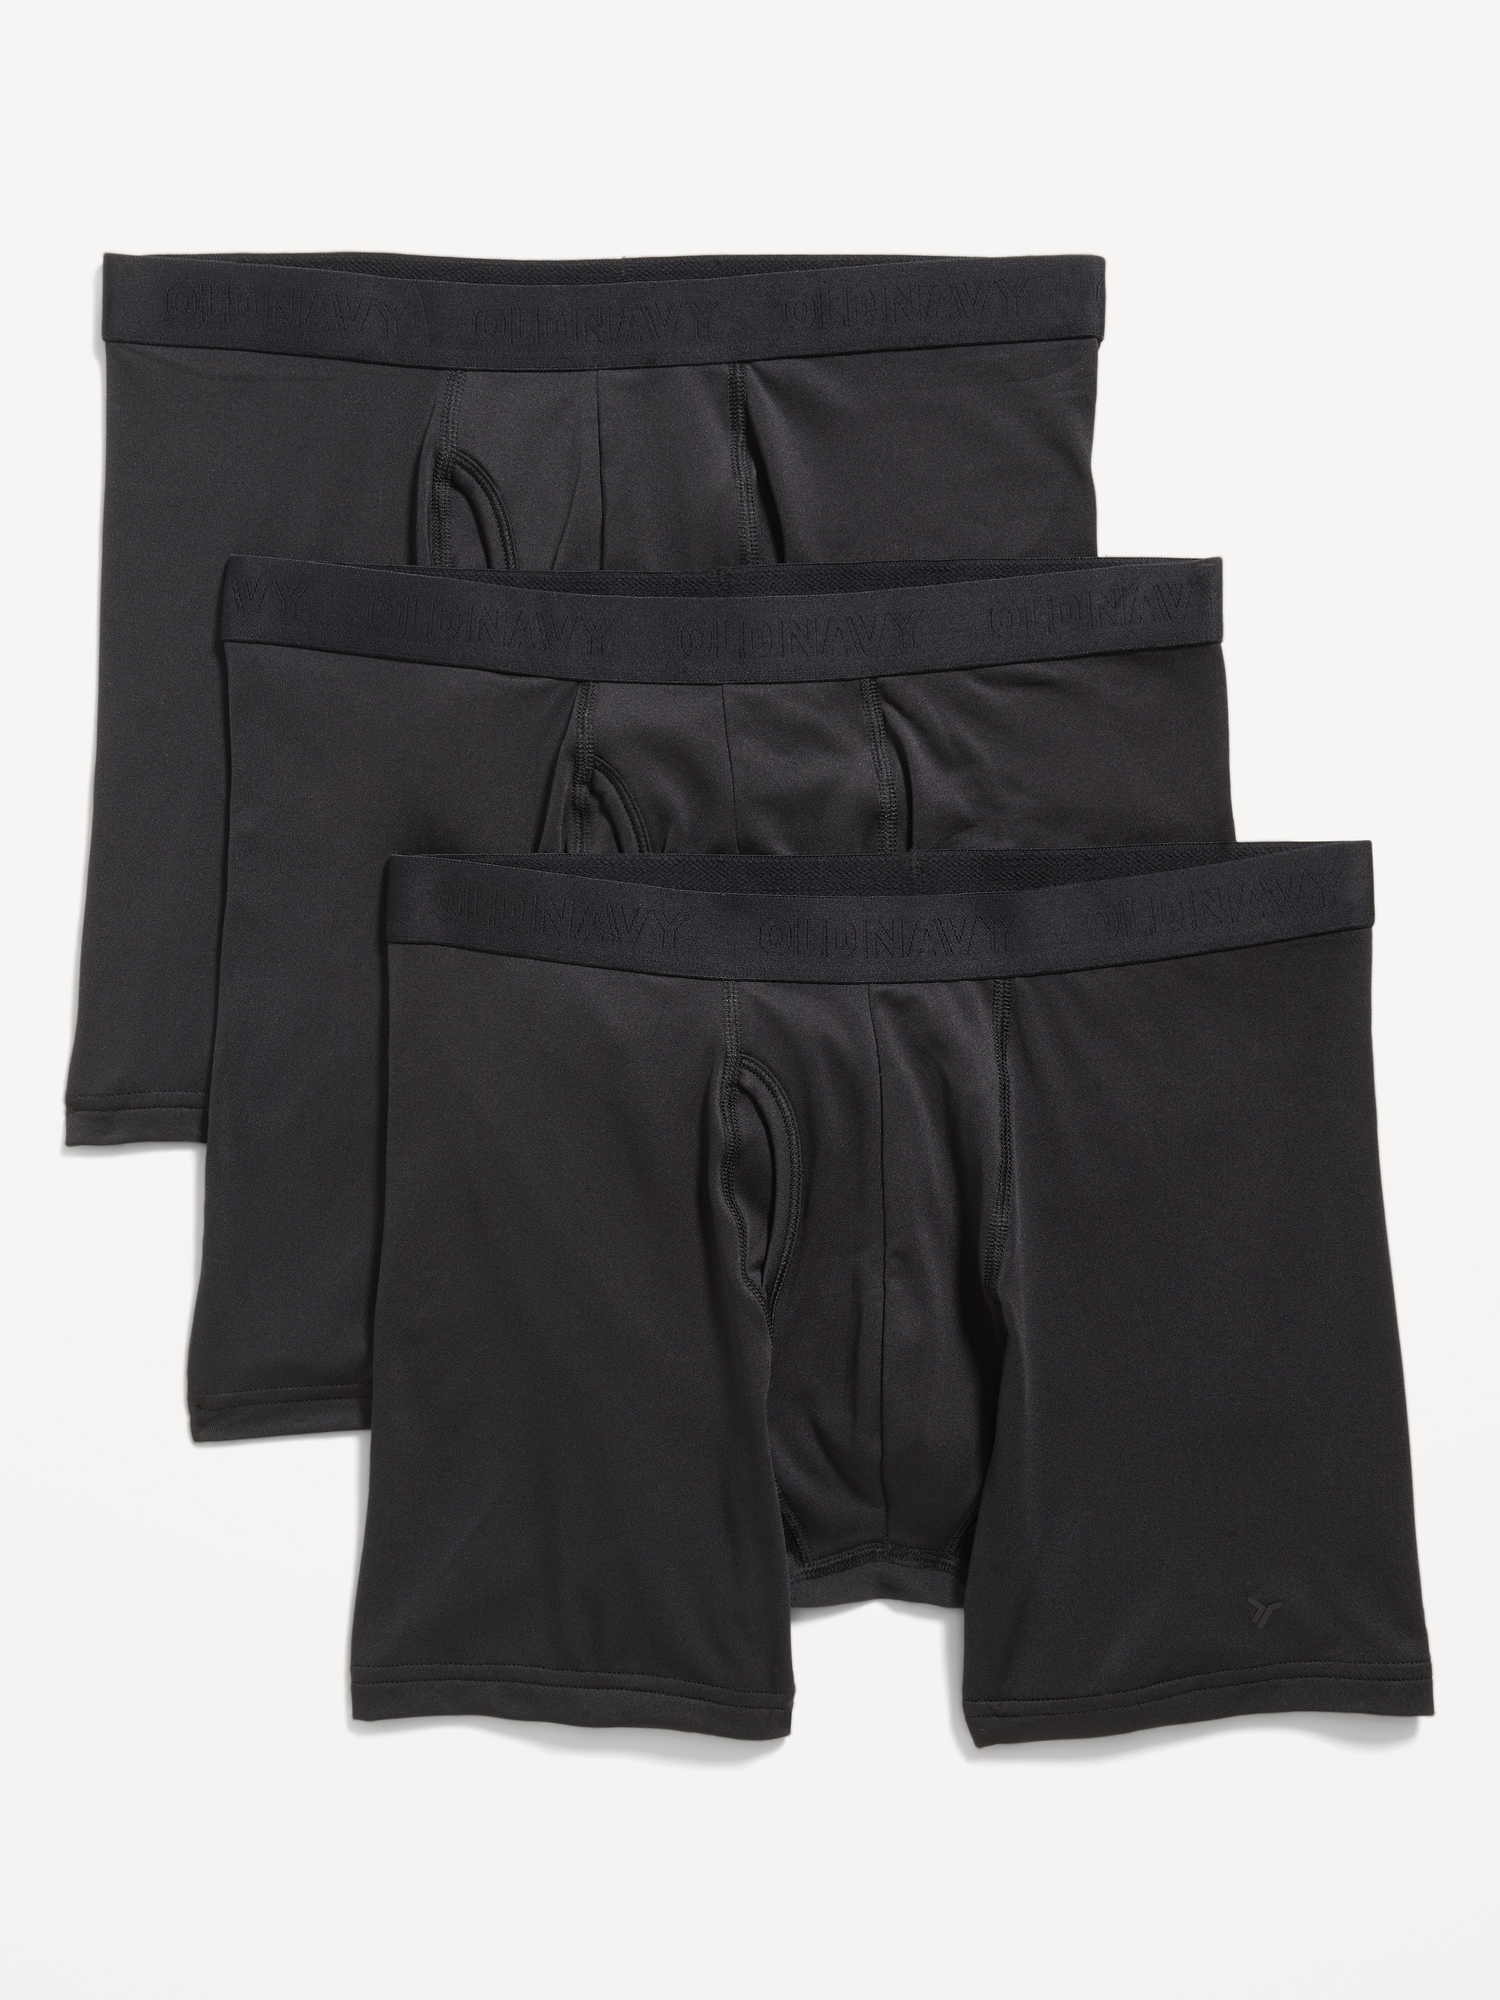 Go-Dry Cool Performance Boxer-Brief Underwear 3-Pack -- 5-inch